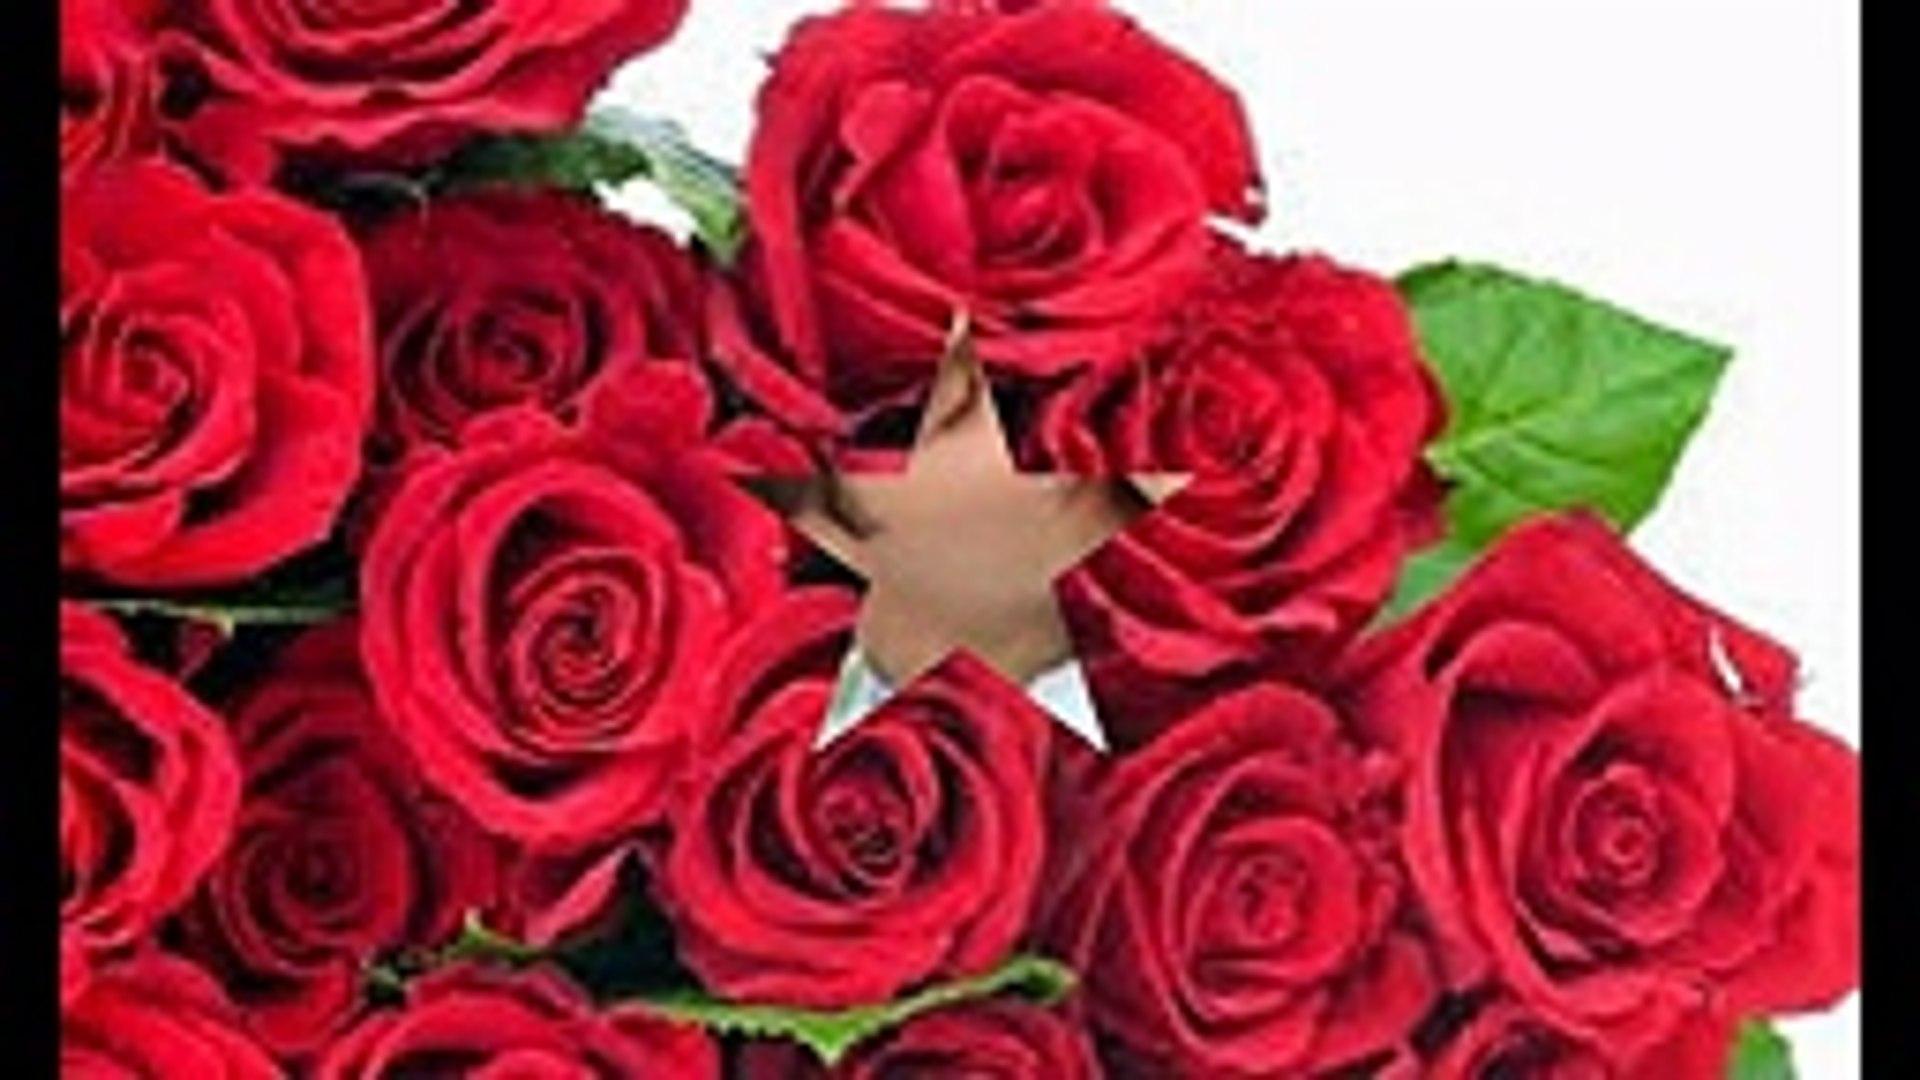 Happy Rose Day Rose Day Wishes Image Wallpaper